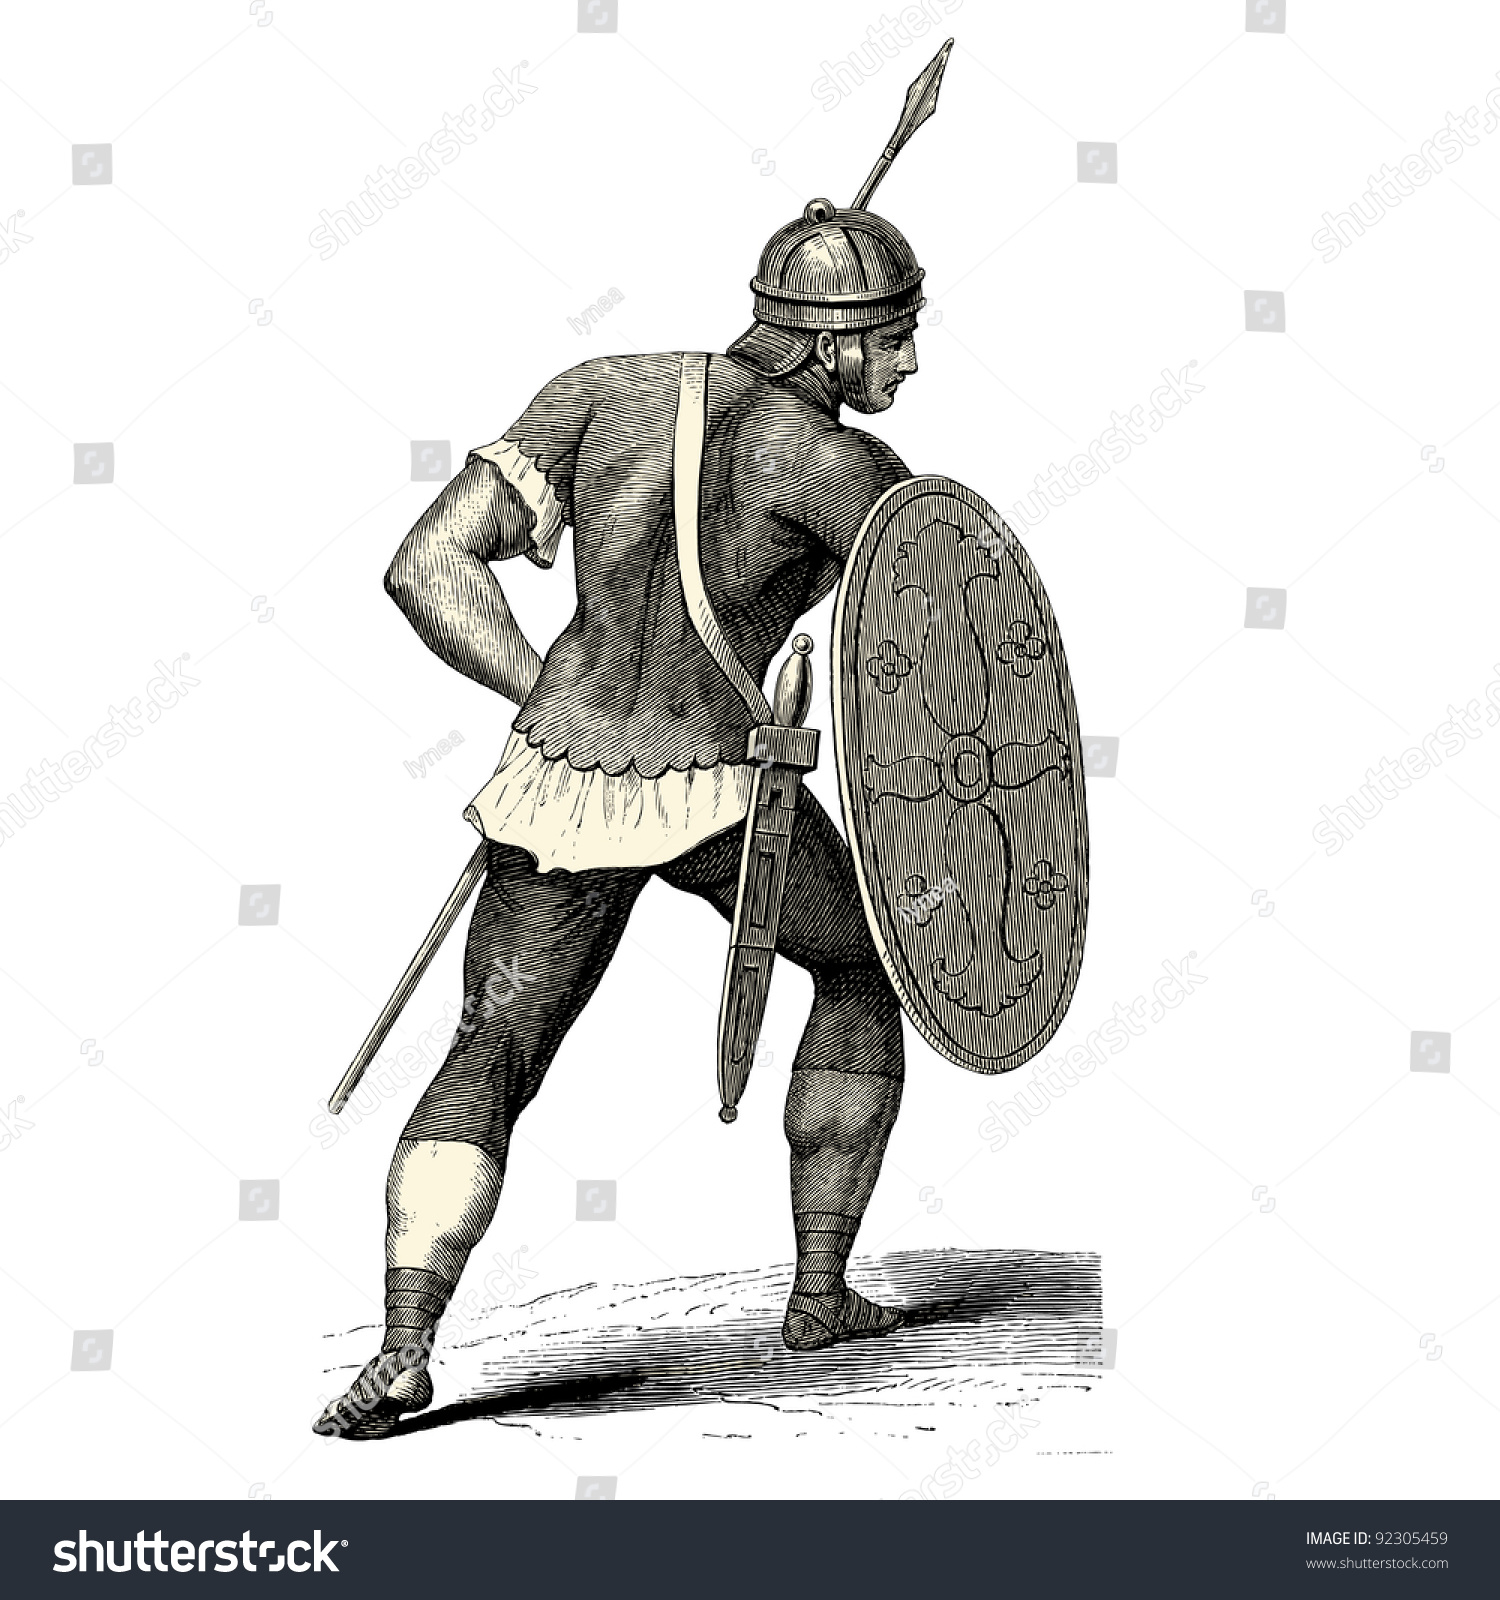 Roman Soldier Vintage Engraved Illustration Costumes Stock Vector ...